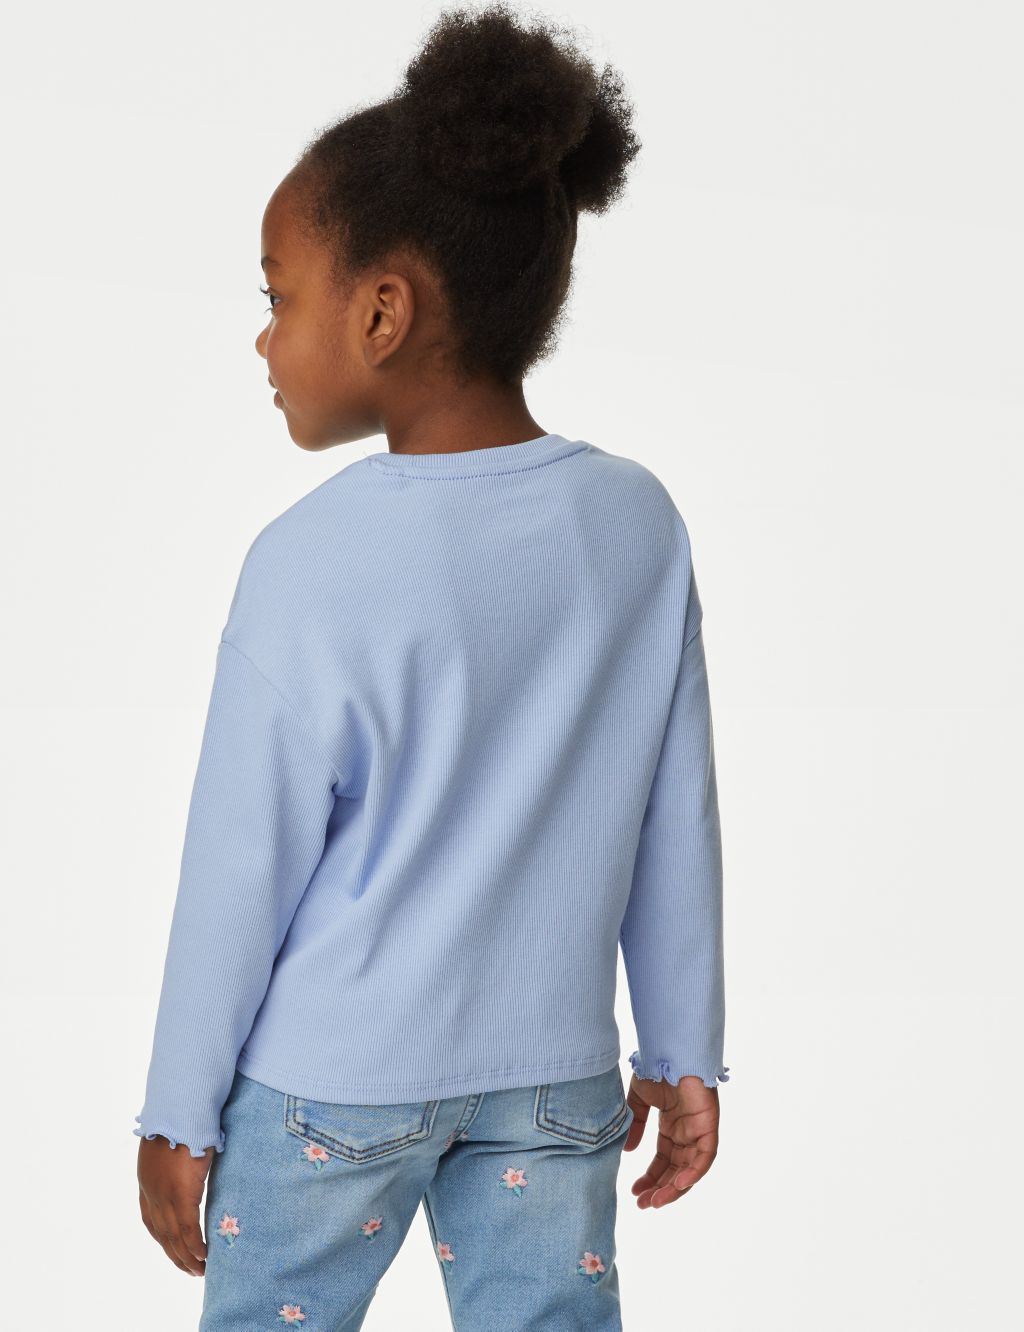 Cotton Rich Ribed Top (2-8 Yrs) image 4